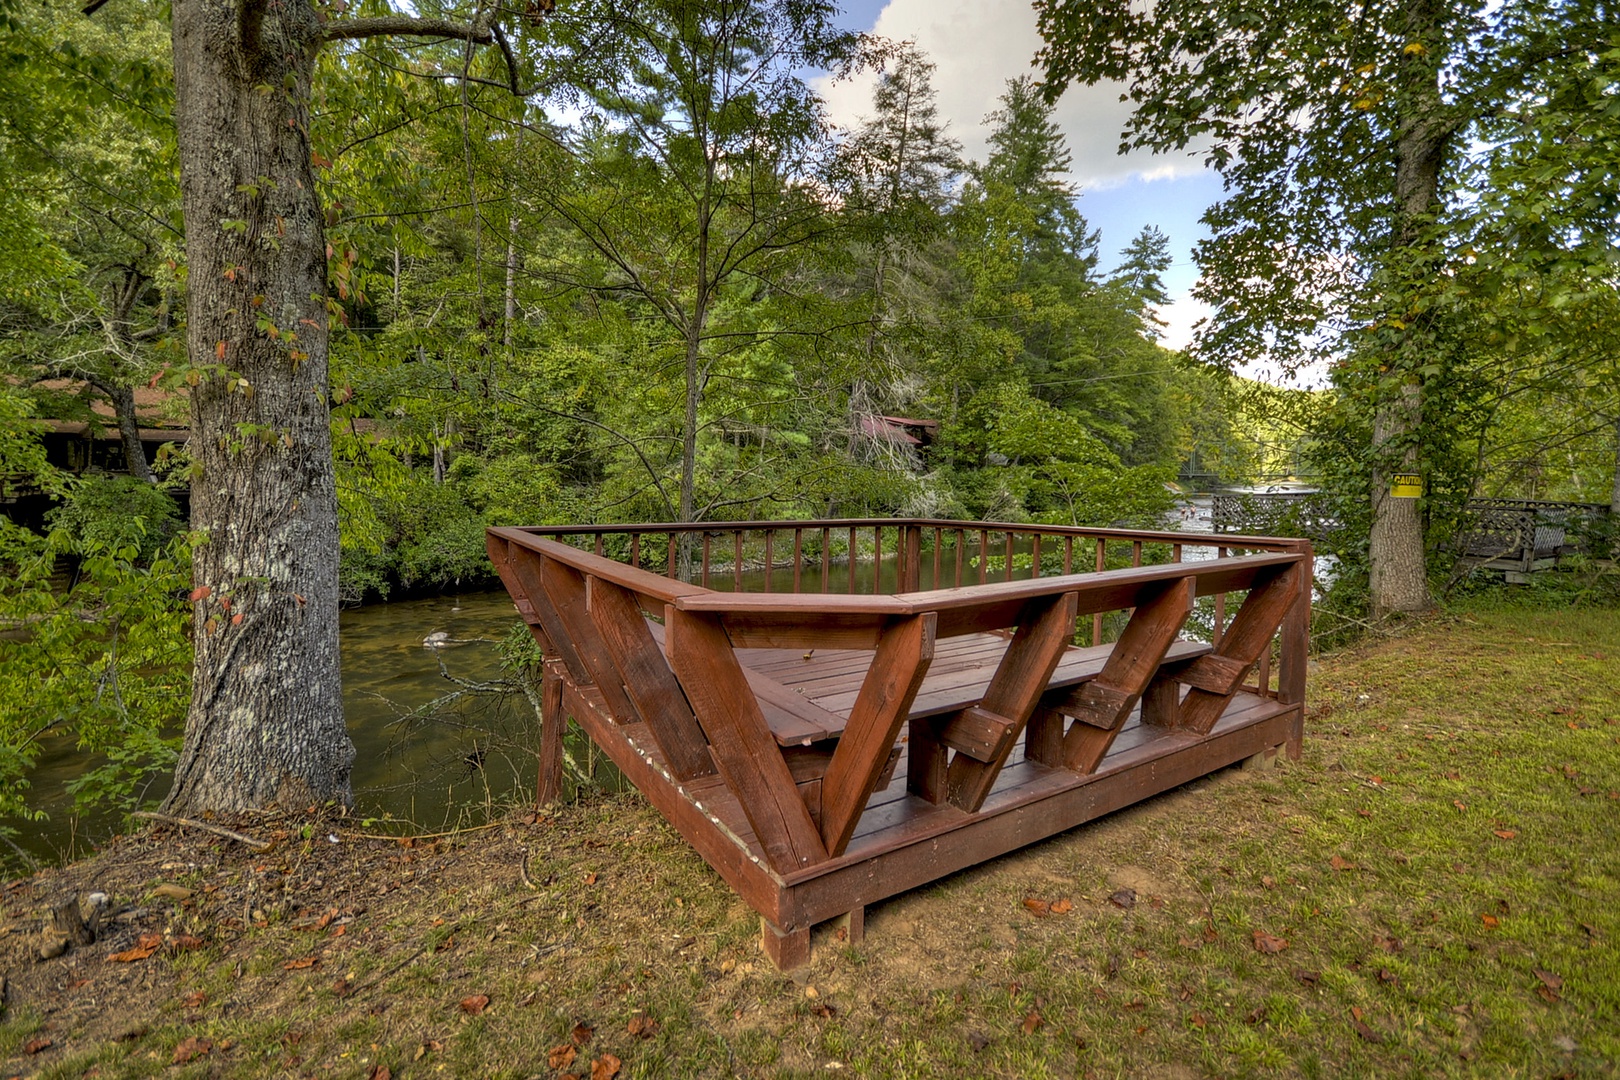 Toccoa Mist- Viewing platform on the Toccoa River